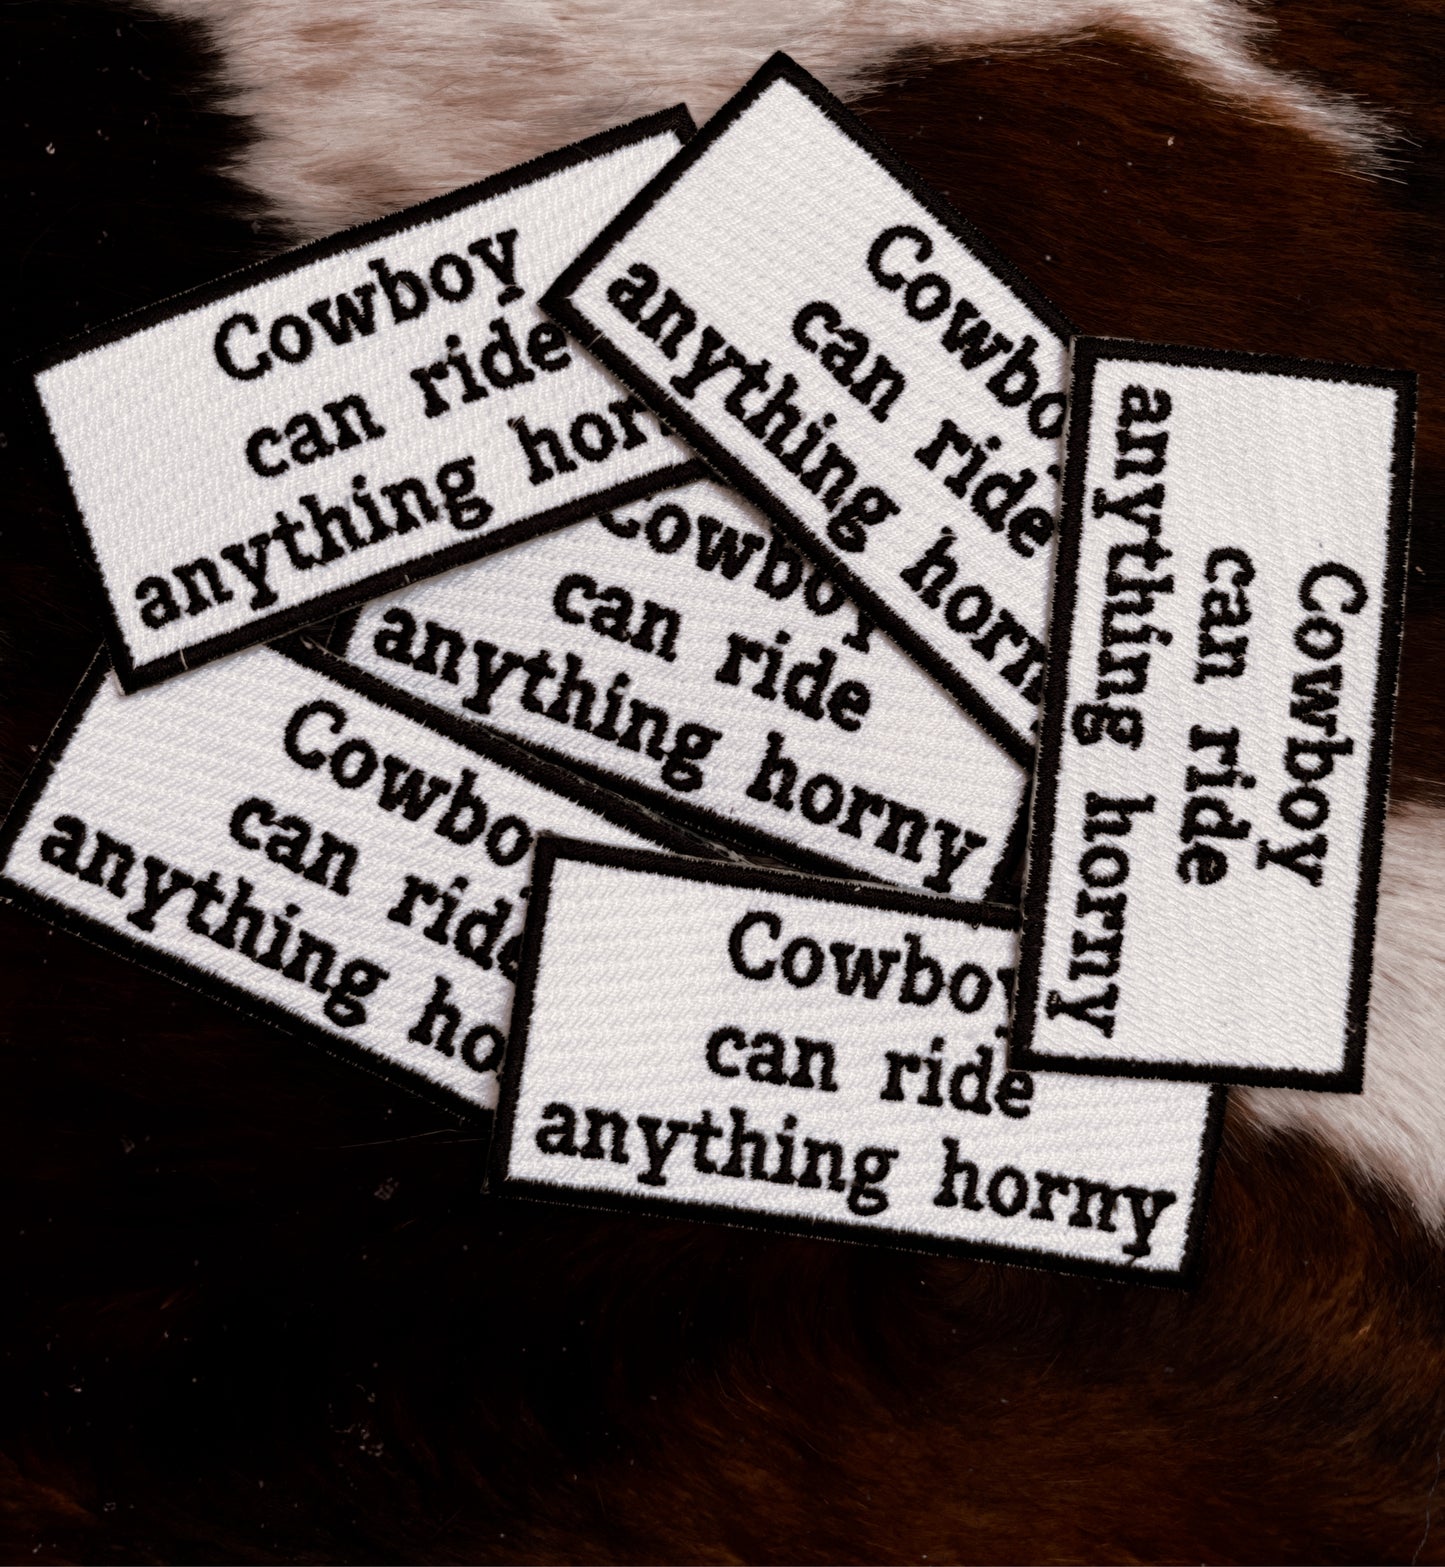 Cowboy can ride anything horny patch